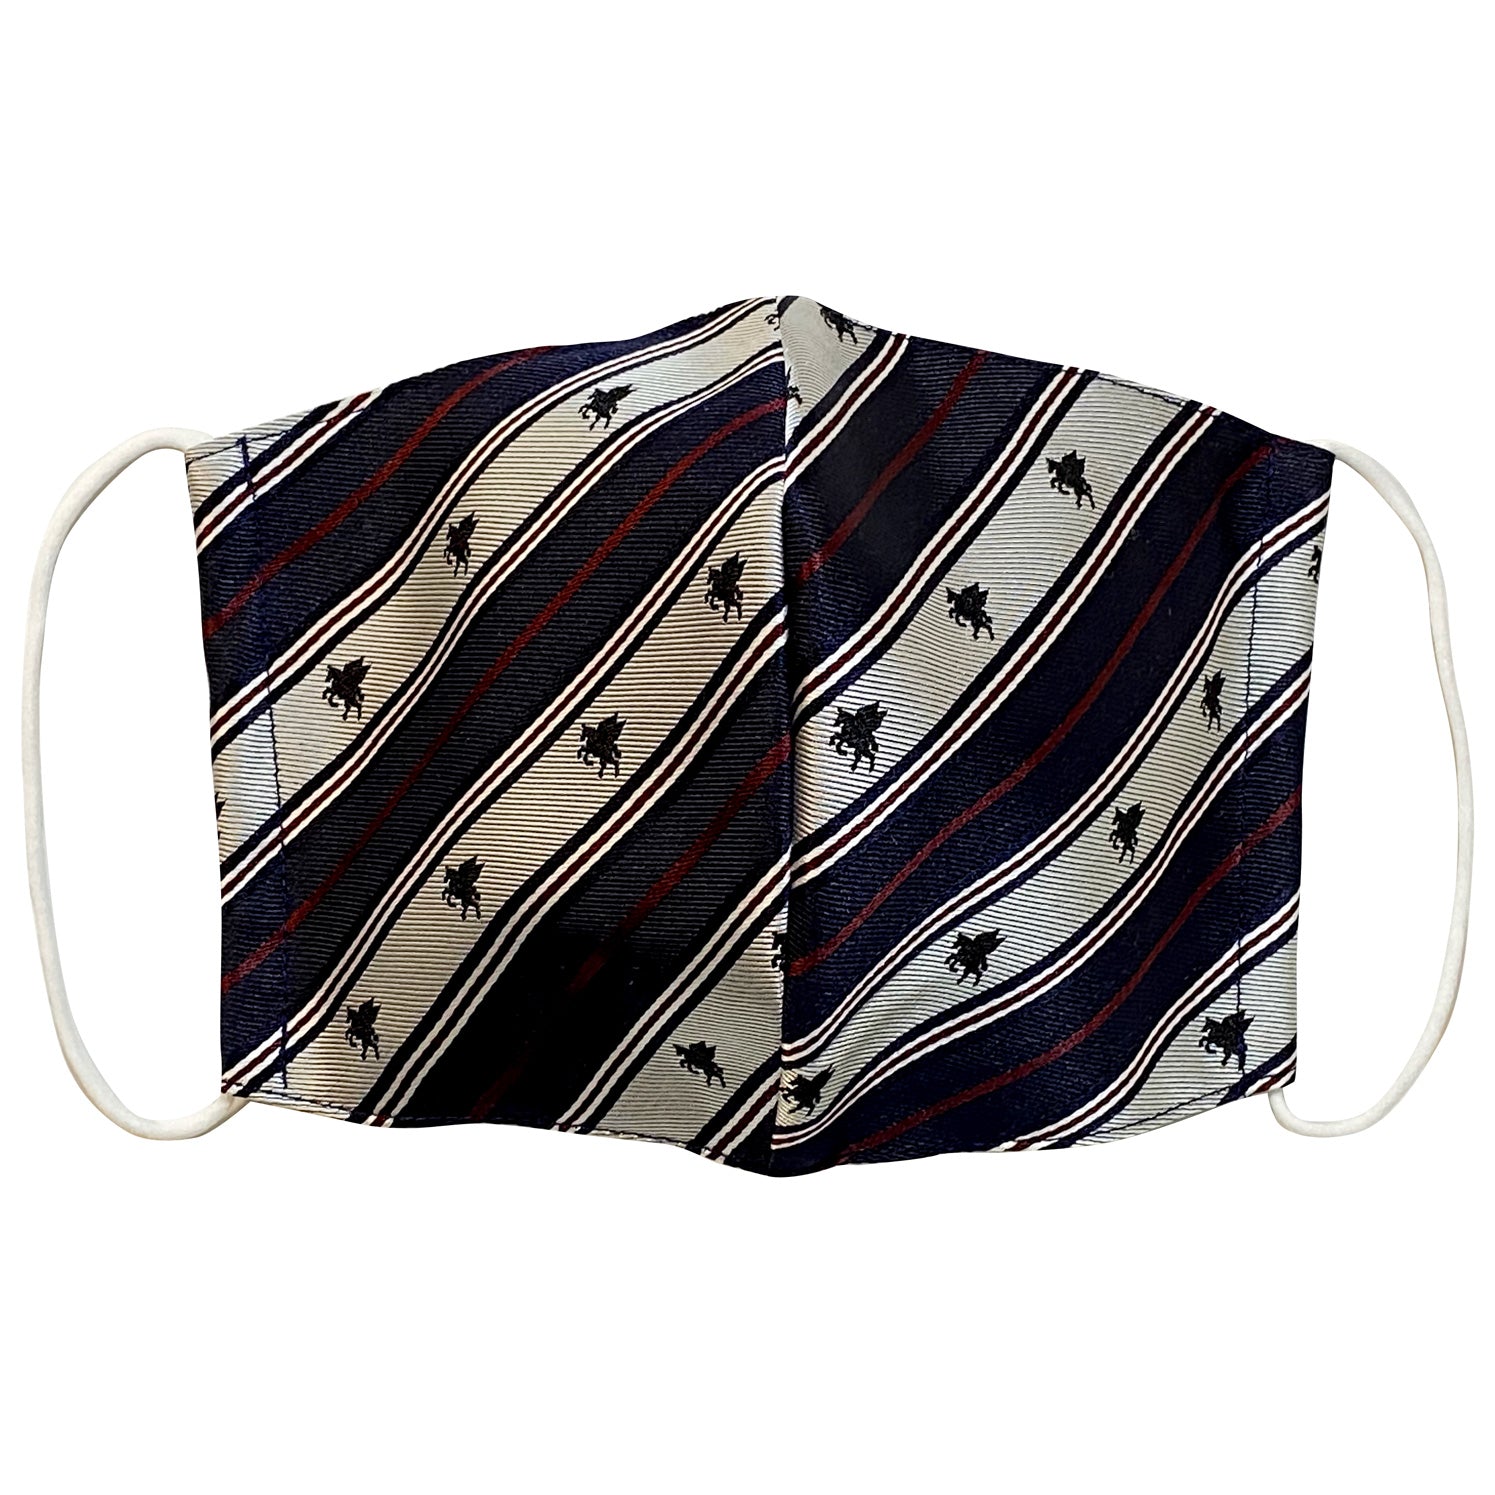 Washable Silk Face Mask Reusable Unisex -Striped Pattern Large Size Made in Japan FORTUNA Tokyo